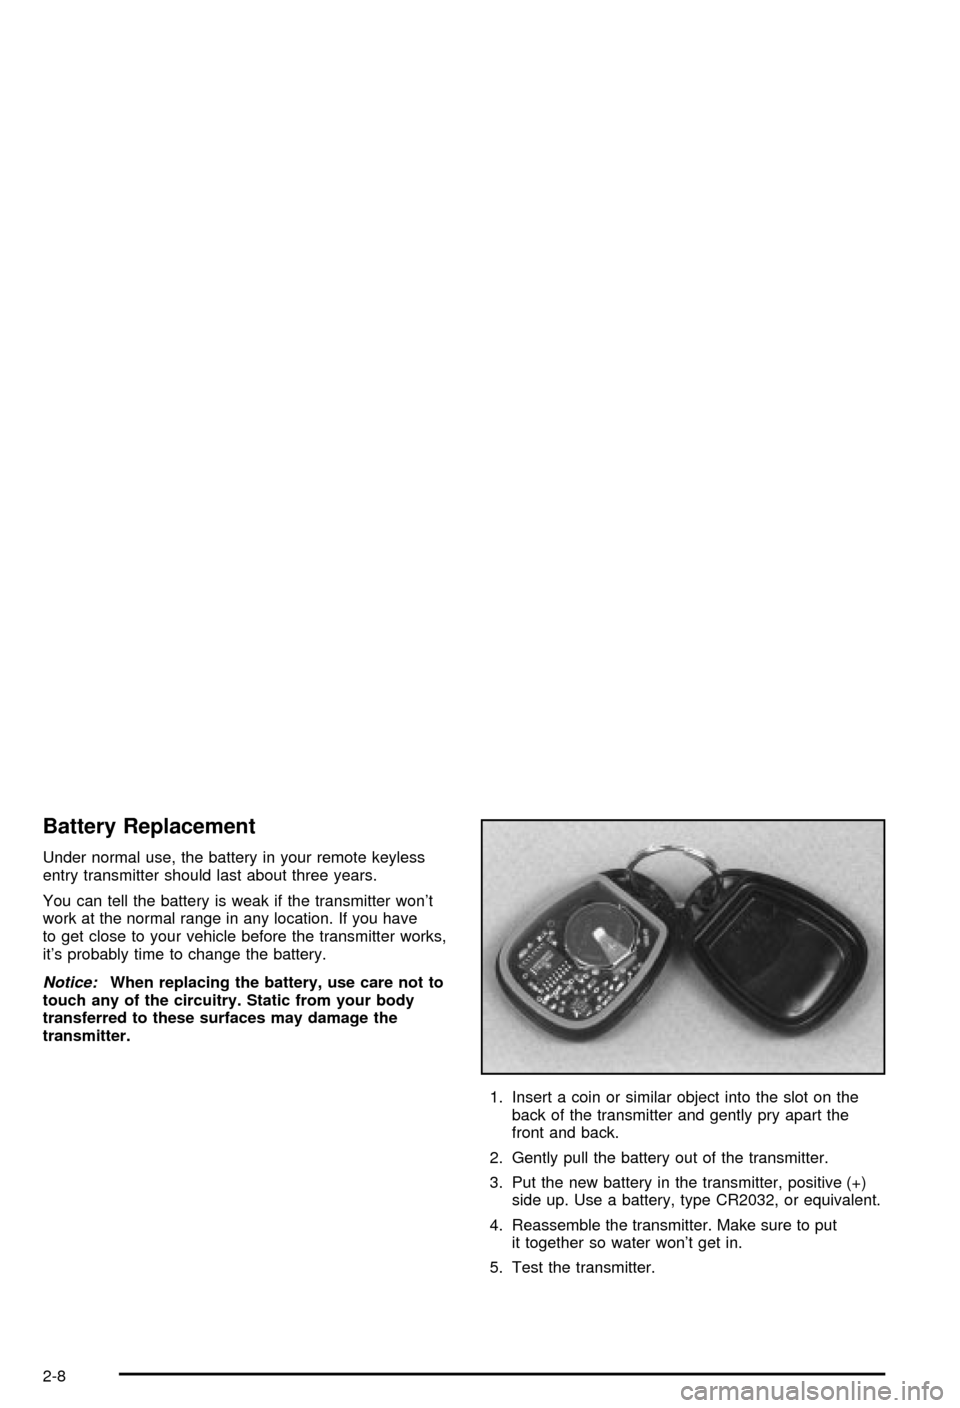 CHEVROLET CORVETTE 2003 5.G Owners Manual Battery Replacement
Under normal use, the battery in your remote keyless
entry transmitter should last about three years.
You can tell the battery is weak if the transmitter wont
work at the normal r